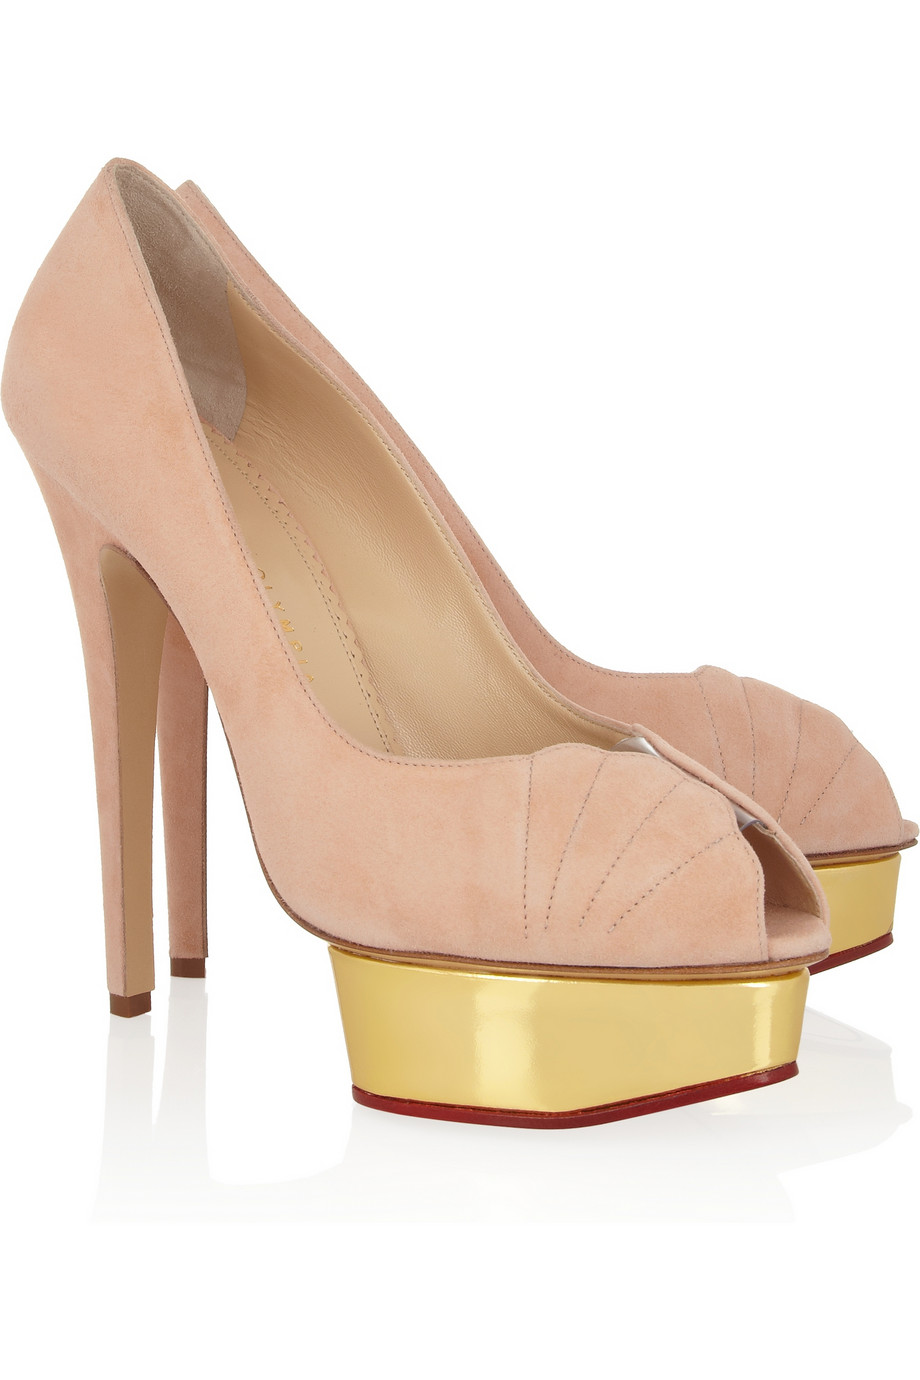 Lyst - Charlotte olympia Dolly Suede Platform Pumps in Metallic